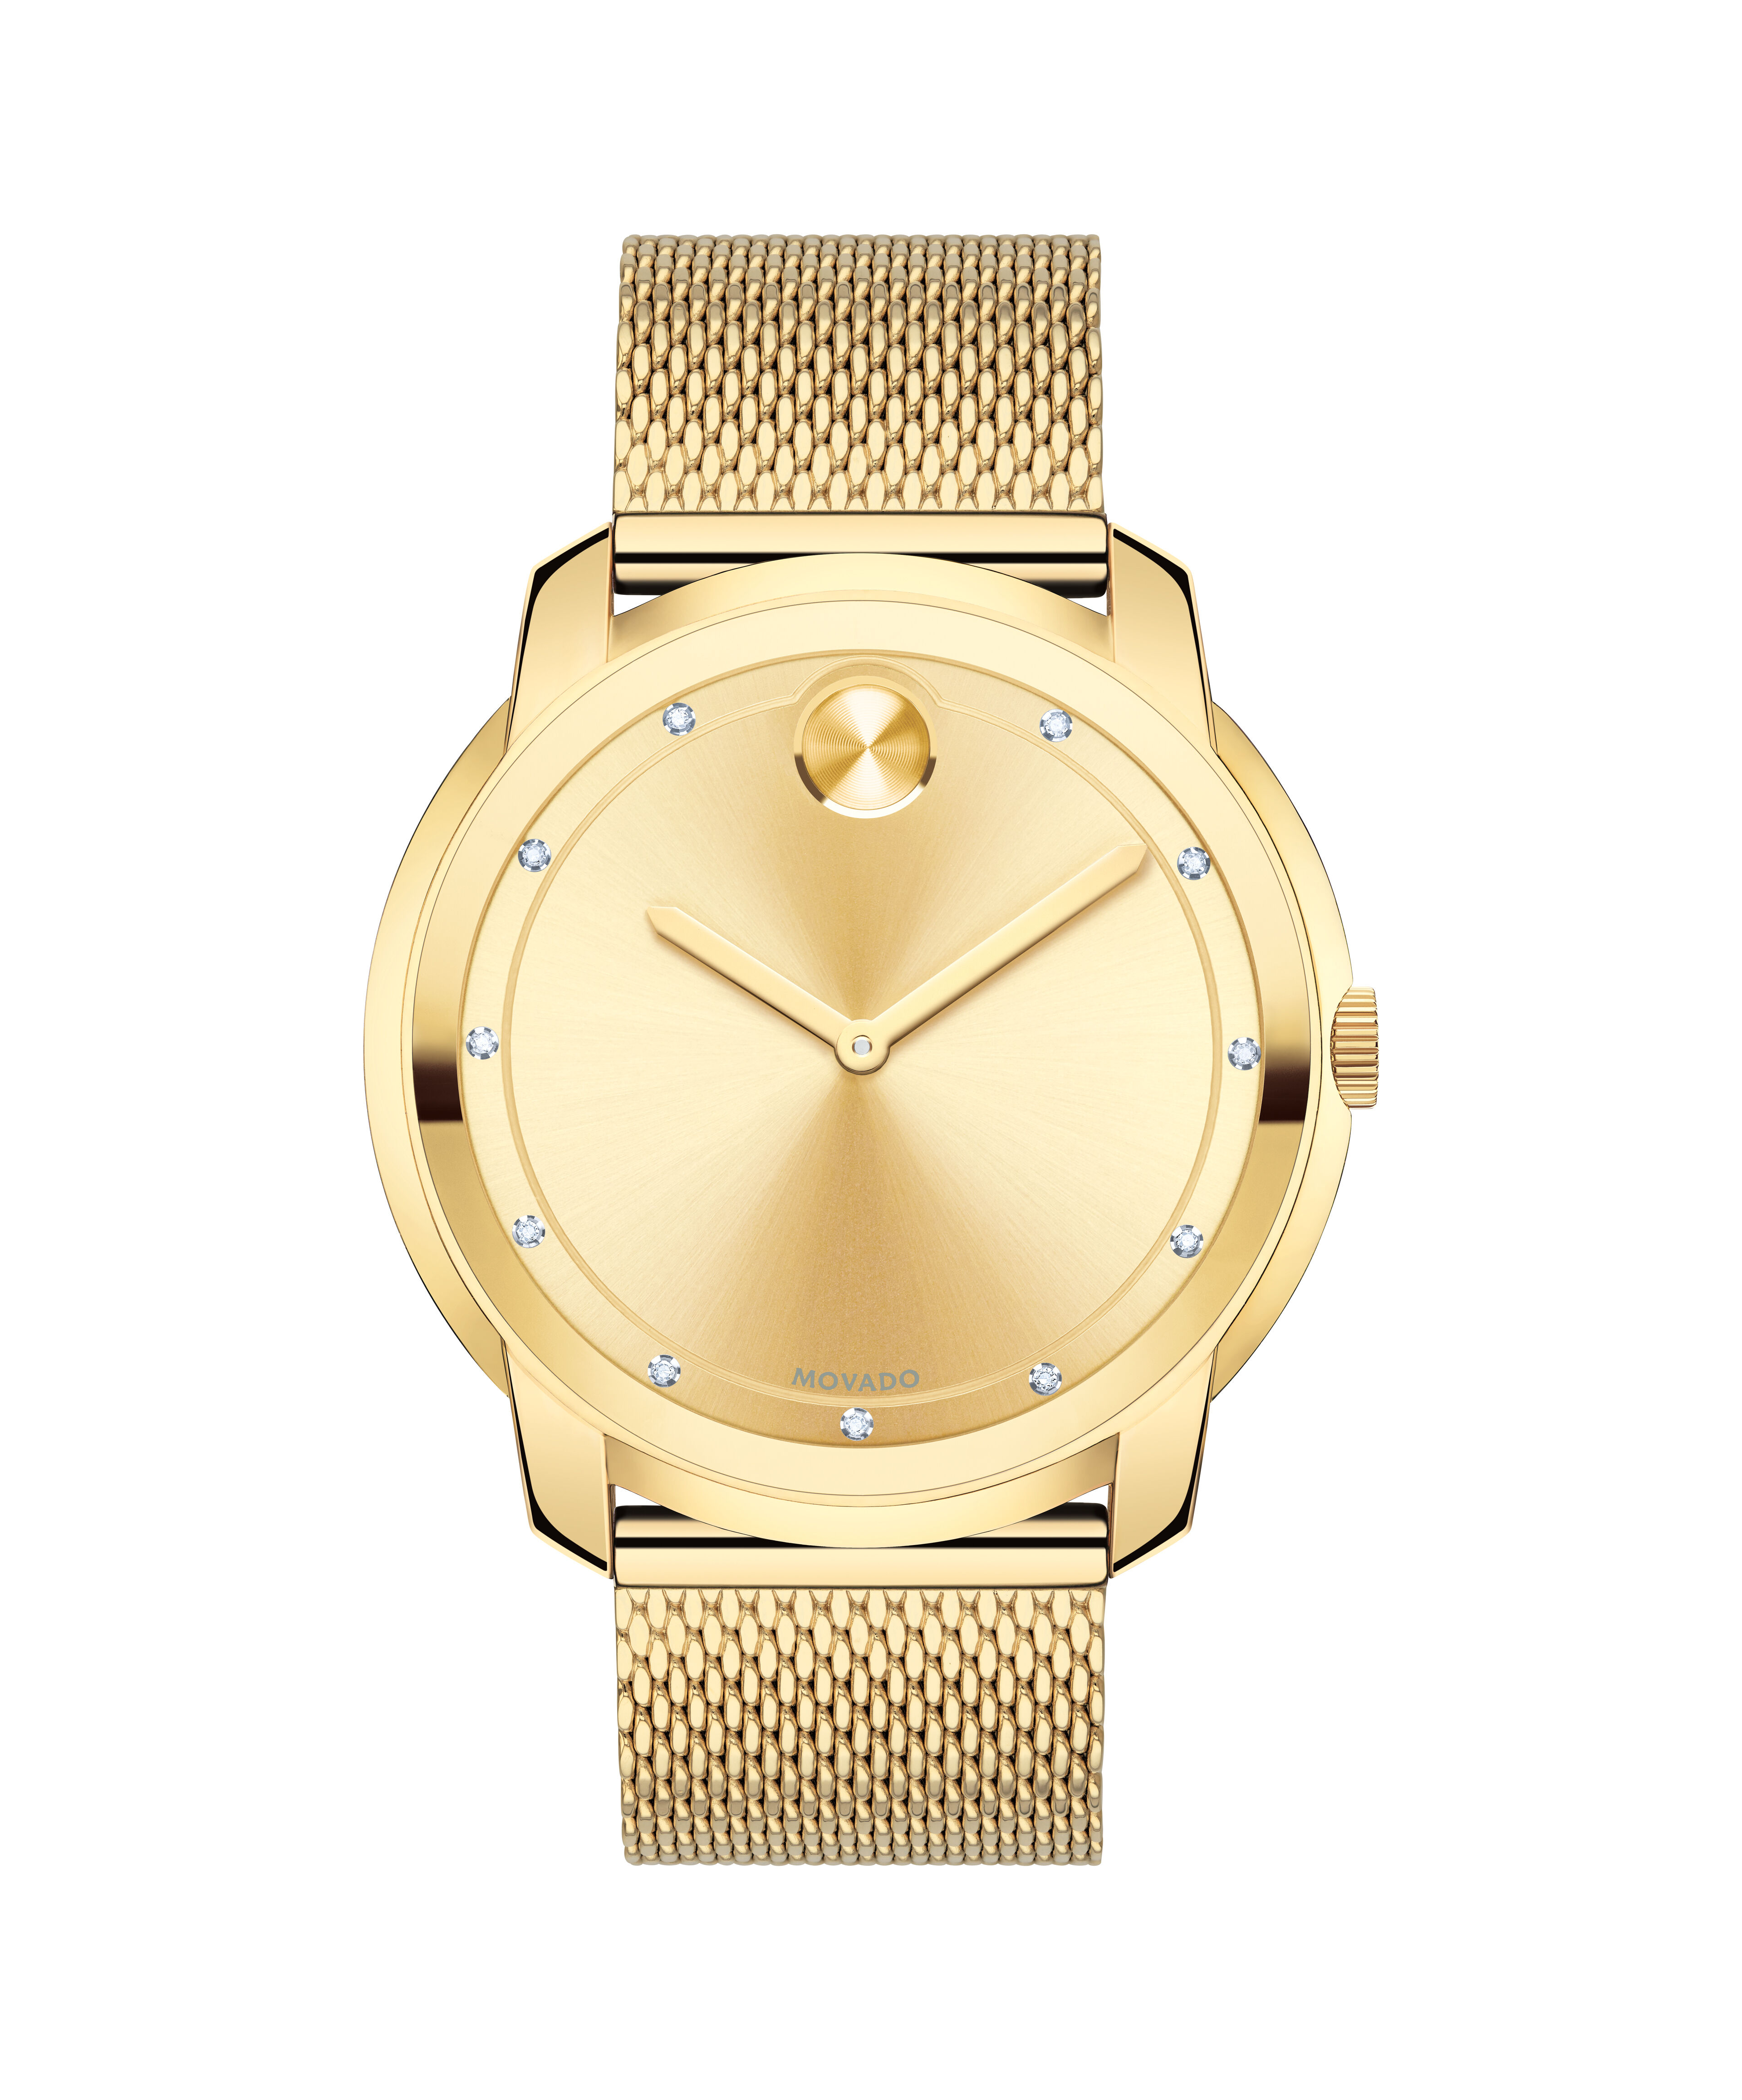 Movado Calendoplan 13322 in 9ct Gold 1953